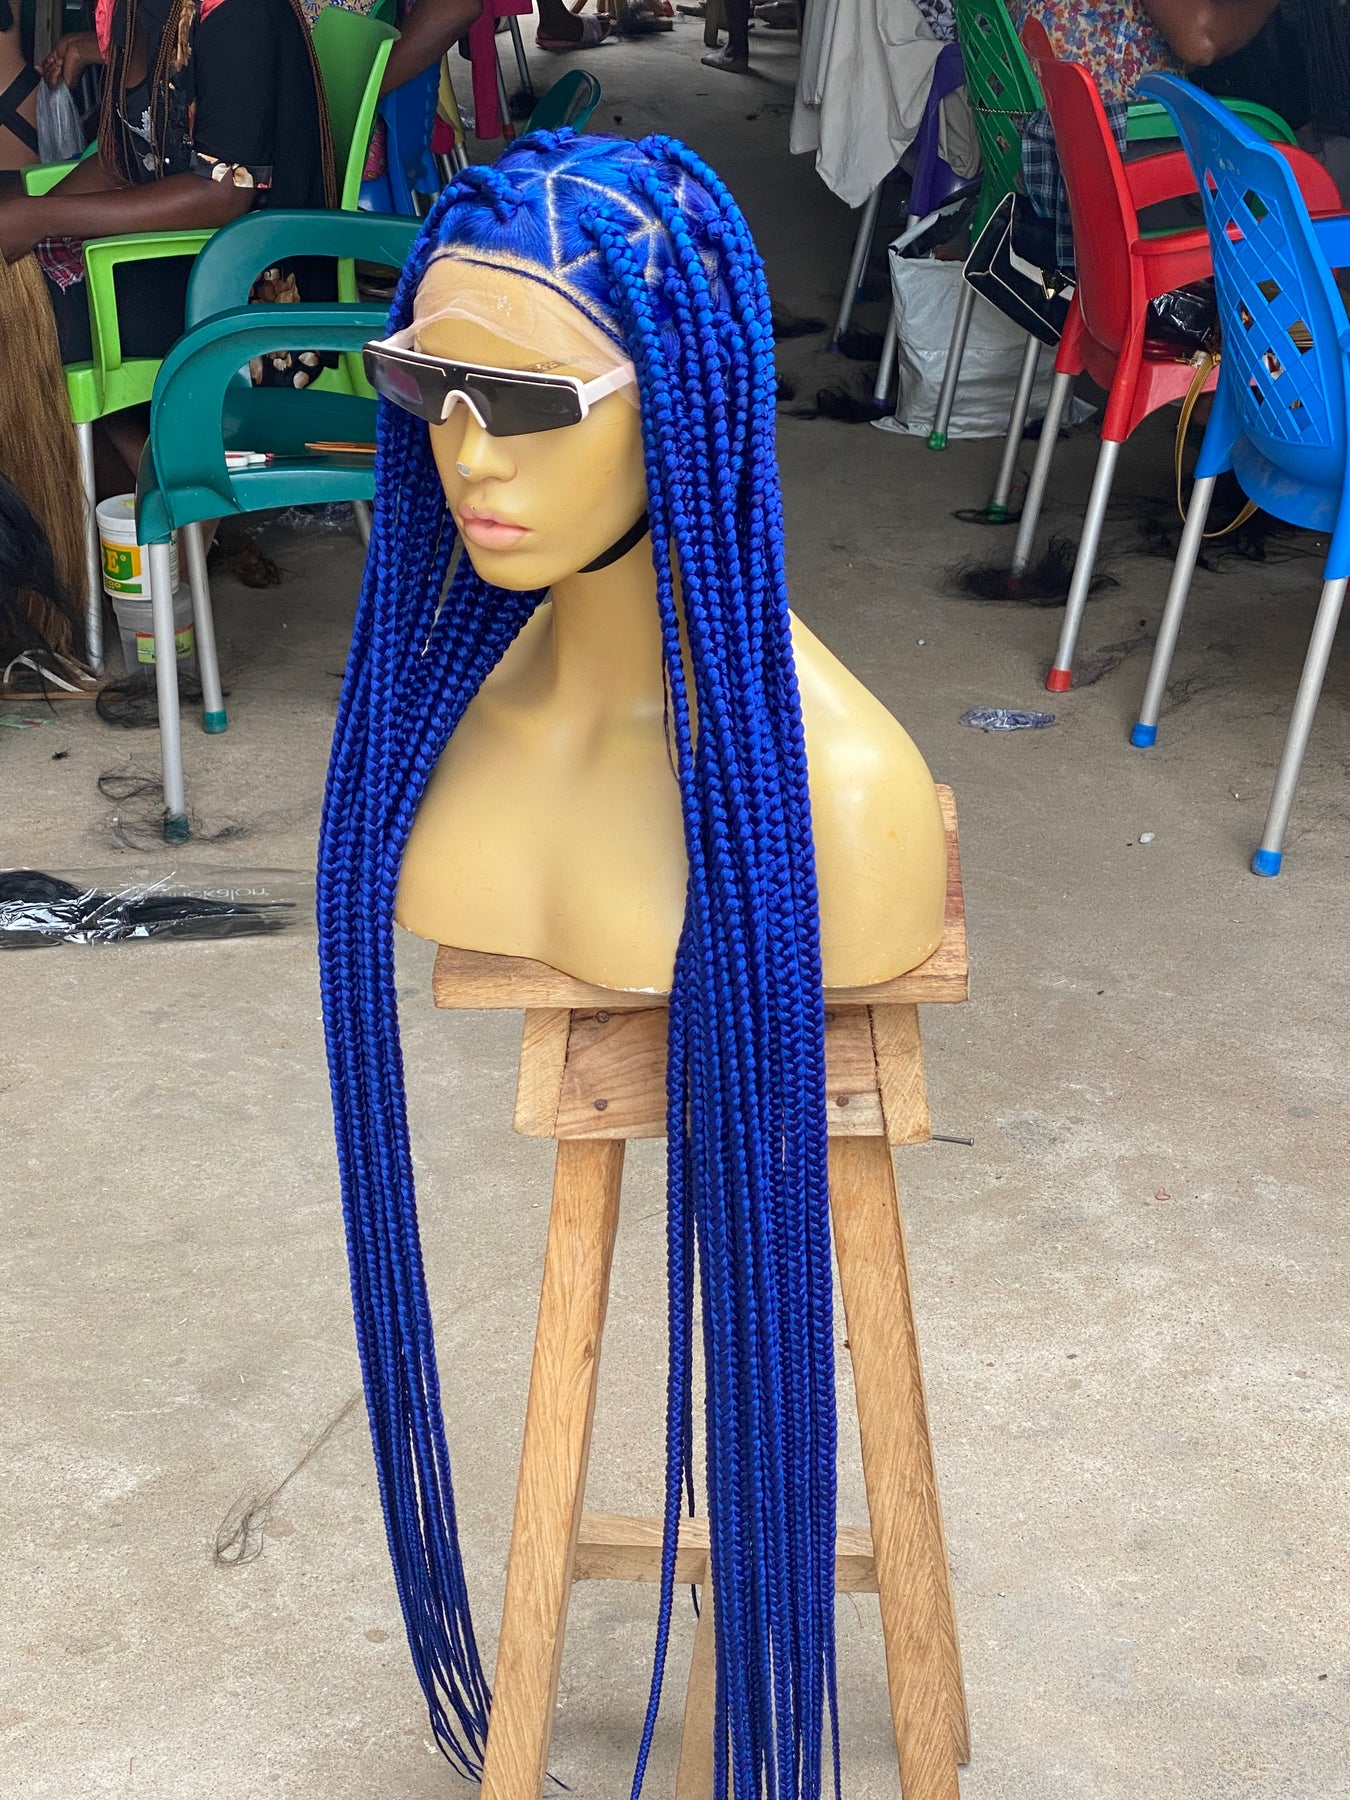 Blue full lace braided wig - Wigs blue, multicolour, average, braided,  long, synthetic hair